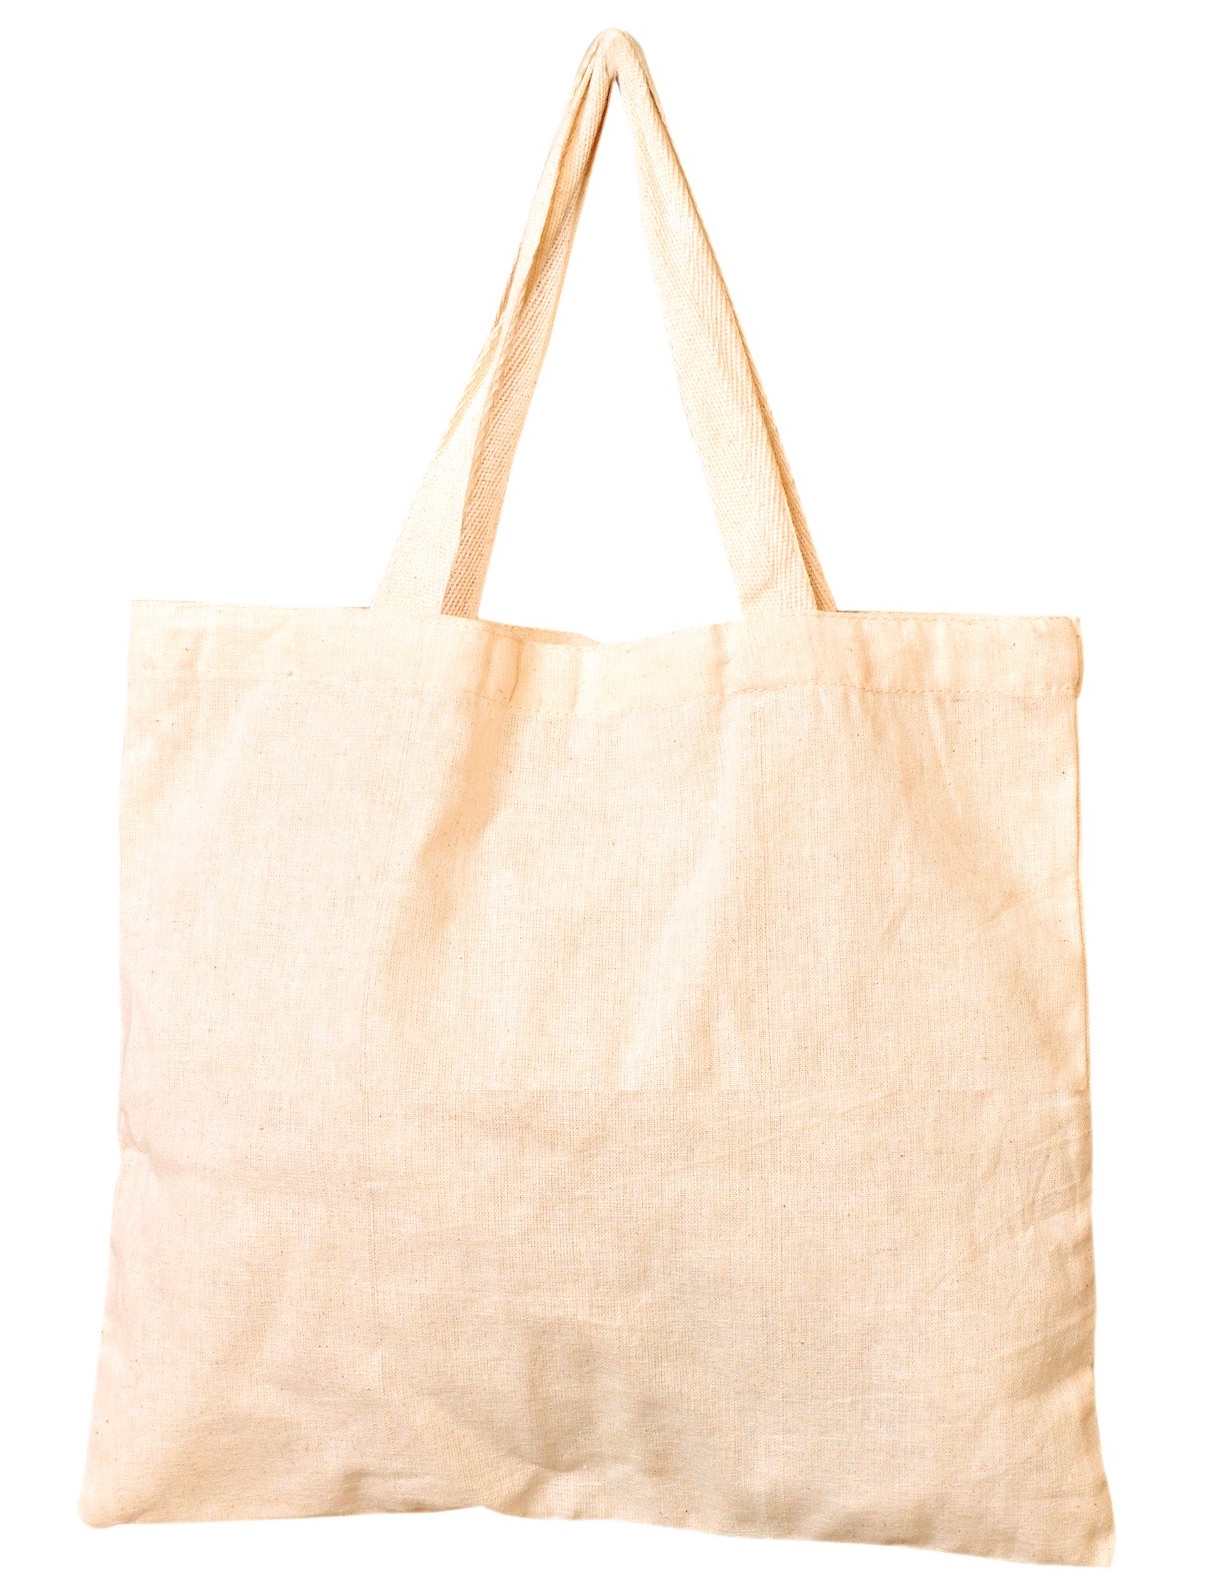 Small Cotton Tote Bags (50 Counts) 10